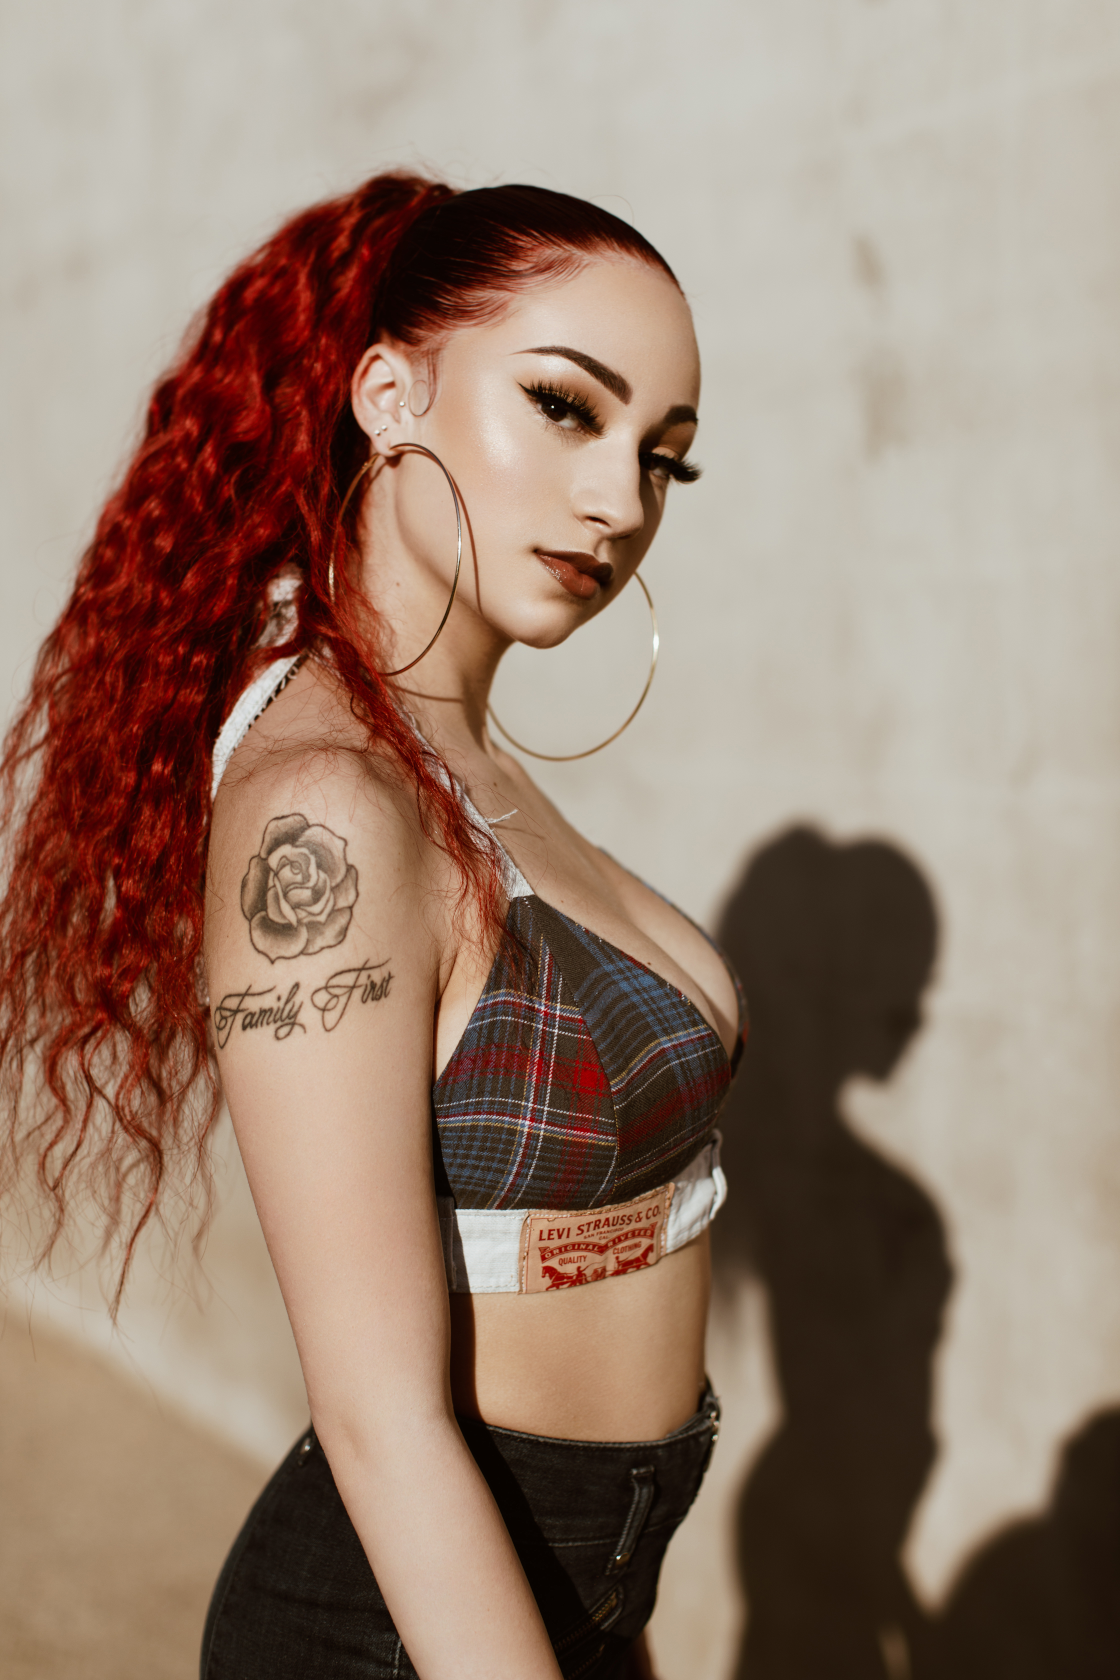 BHAD BHABIE RETURNING TO AUSTRALIA & NEW ZEALAND IN APR-MAY FOR HEADLINE TOUR